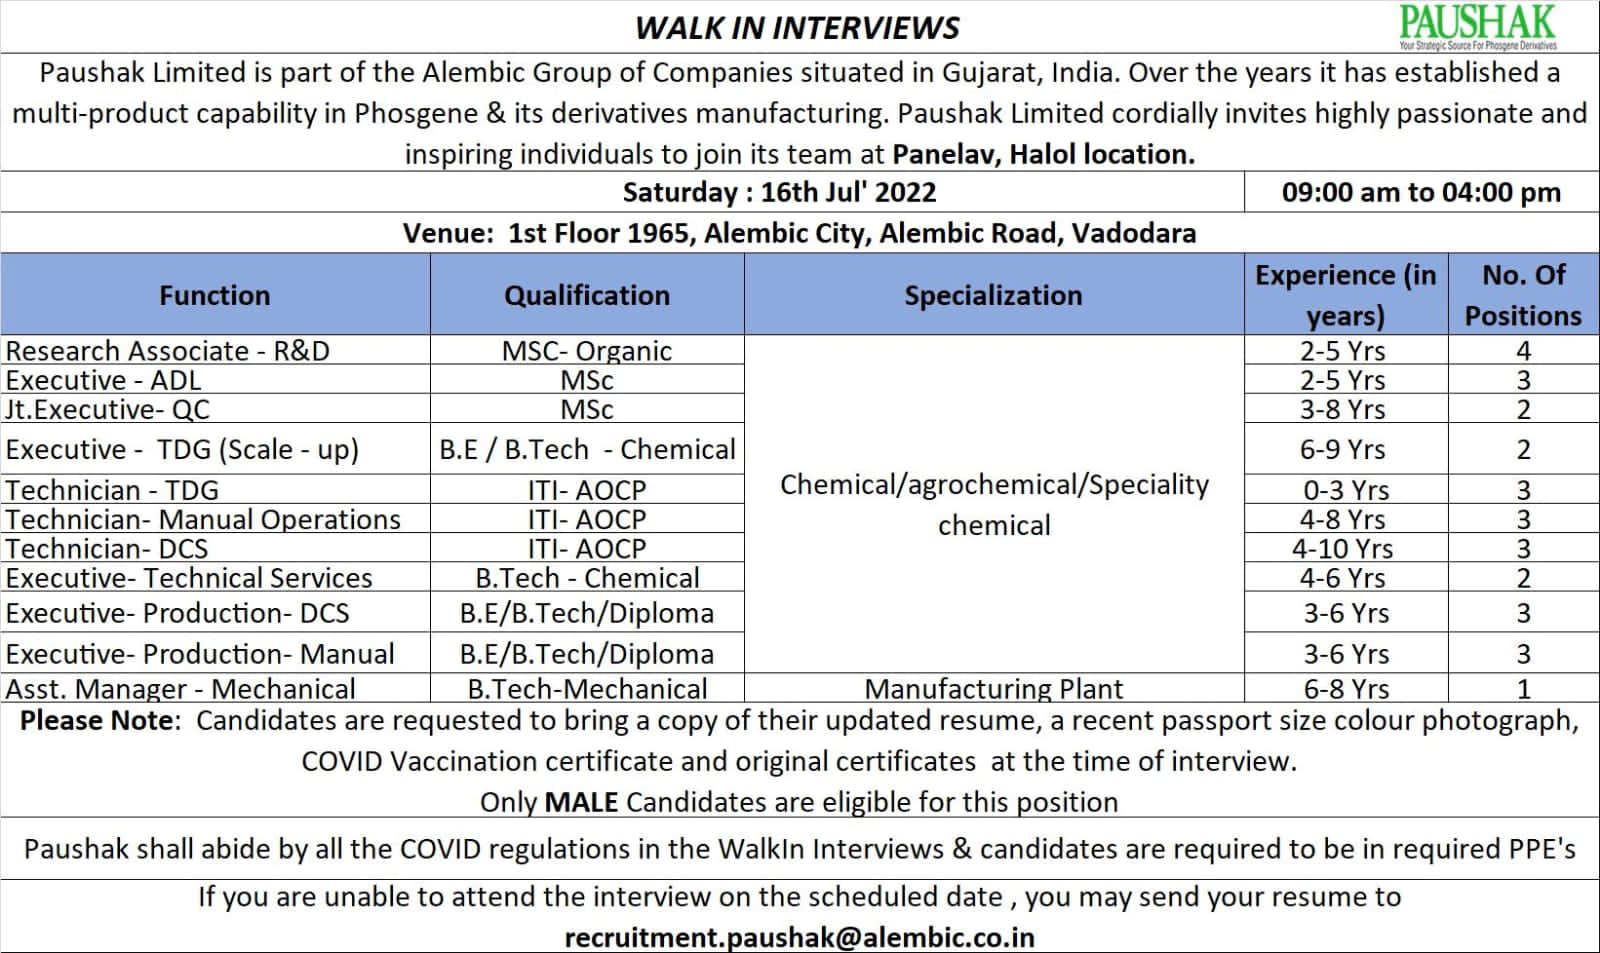 Job Available's for Paushak Ltd Walk-In Interview for MSc Organic Chemistry/ ITI AOCP/ BE/ B Tech Chemical/ Mechanical/ Diploma